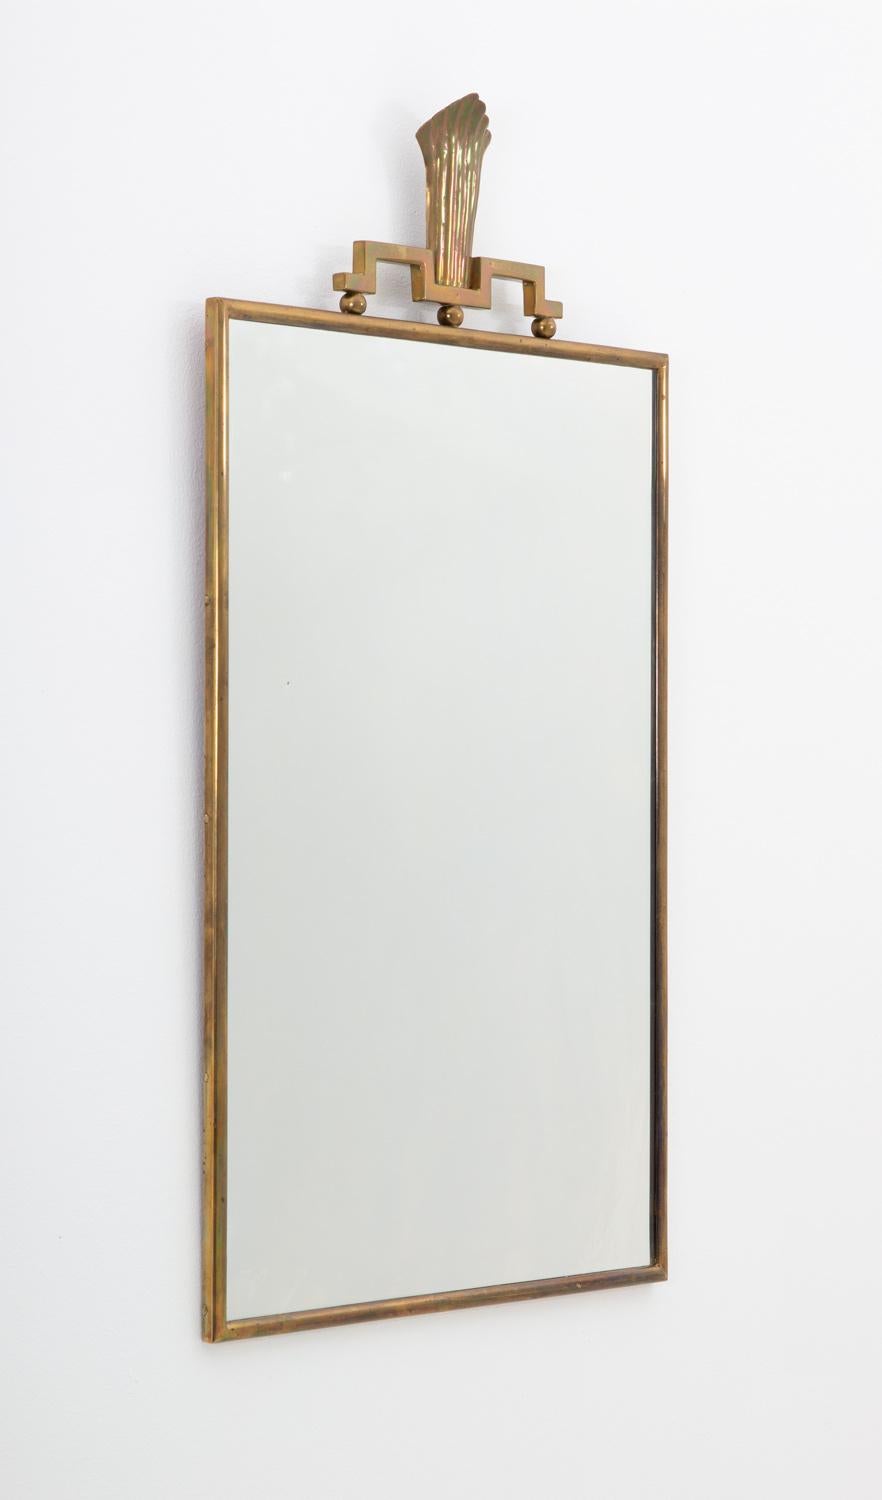 Beautiful and rare studio craft mirror produced by Lars Holmström, Sweden, 1930s. 
High-quality mirror with a brass frame. On top of the frame is a simple but elegant ornament, typical for Lars Holsmtröm´s work during this era.

Condition: Very